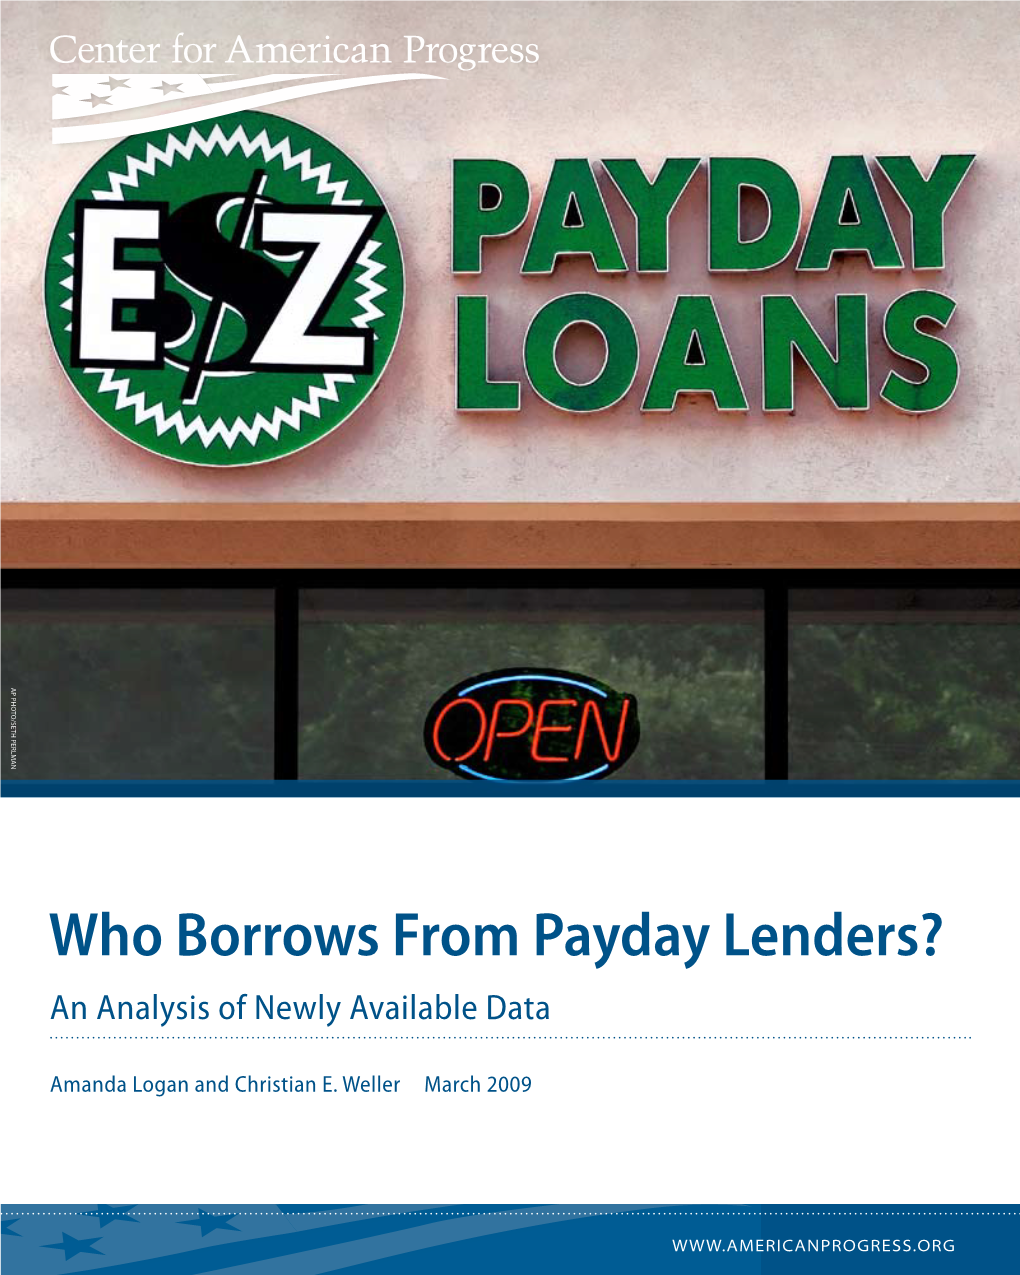 Who Borrows from Payday Lenders? an Analysis of Newly Available Data